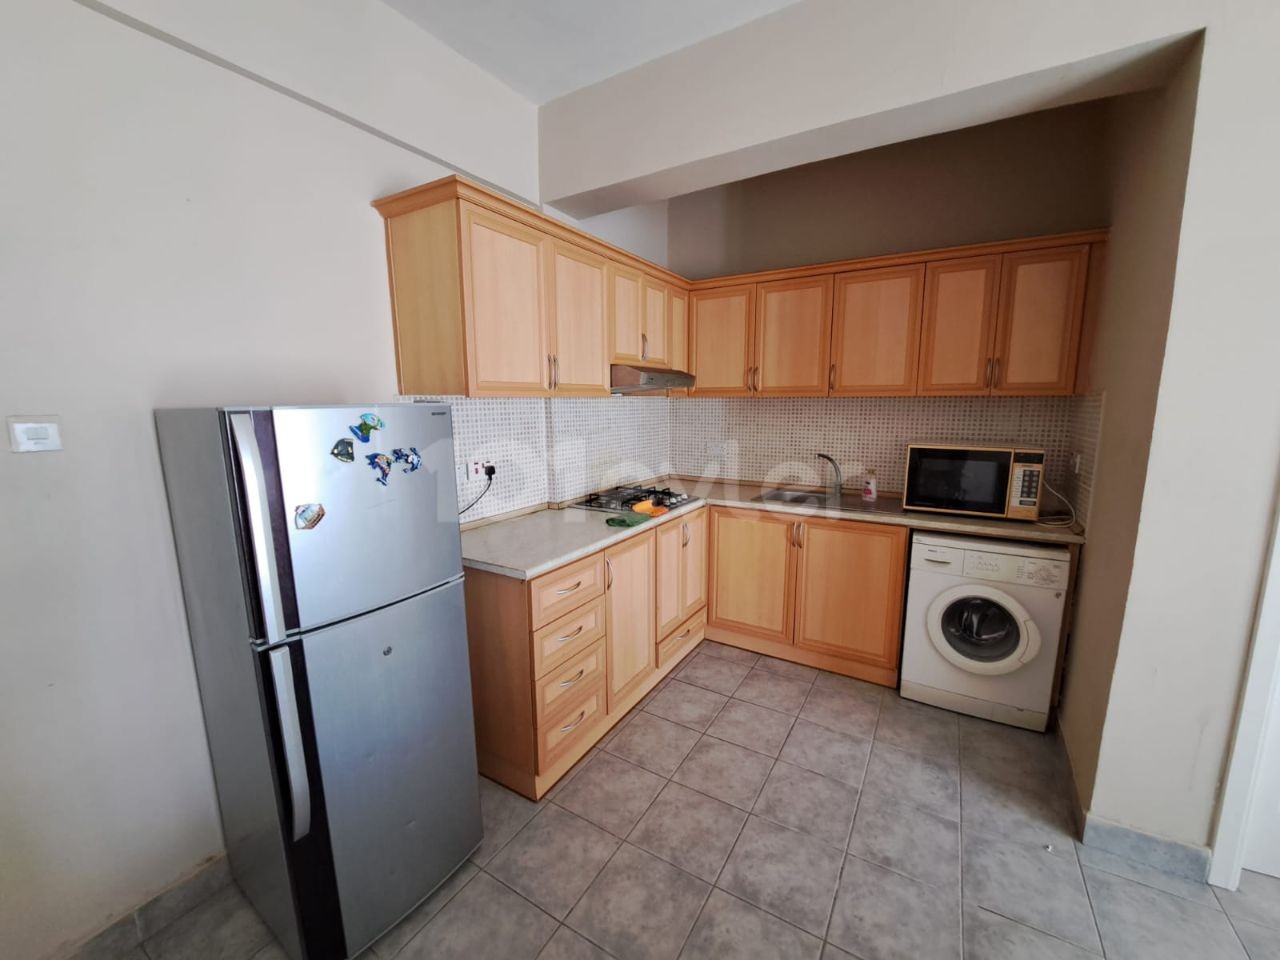 1+1 Flat for Rent on Salamis Street with 3 Monthly Payments